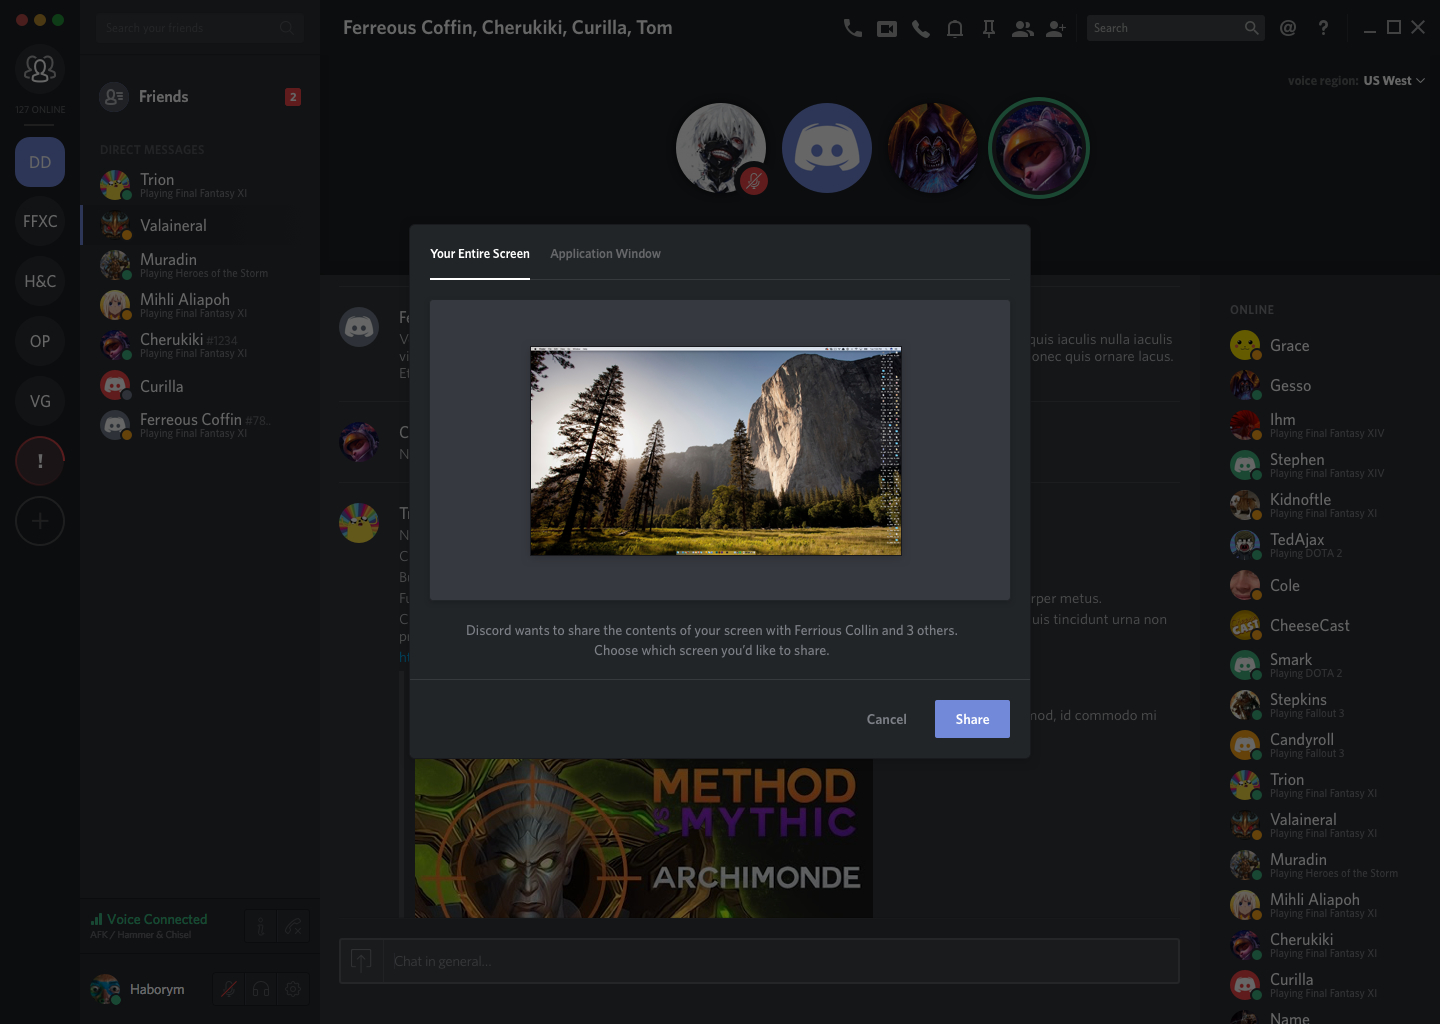 Discord screenshare function demonstrated